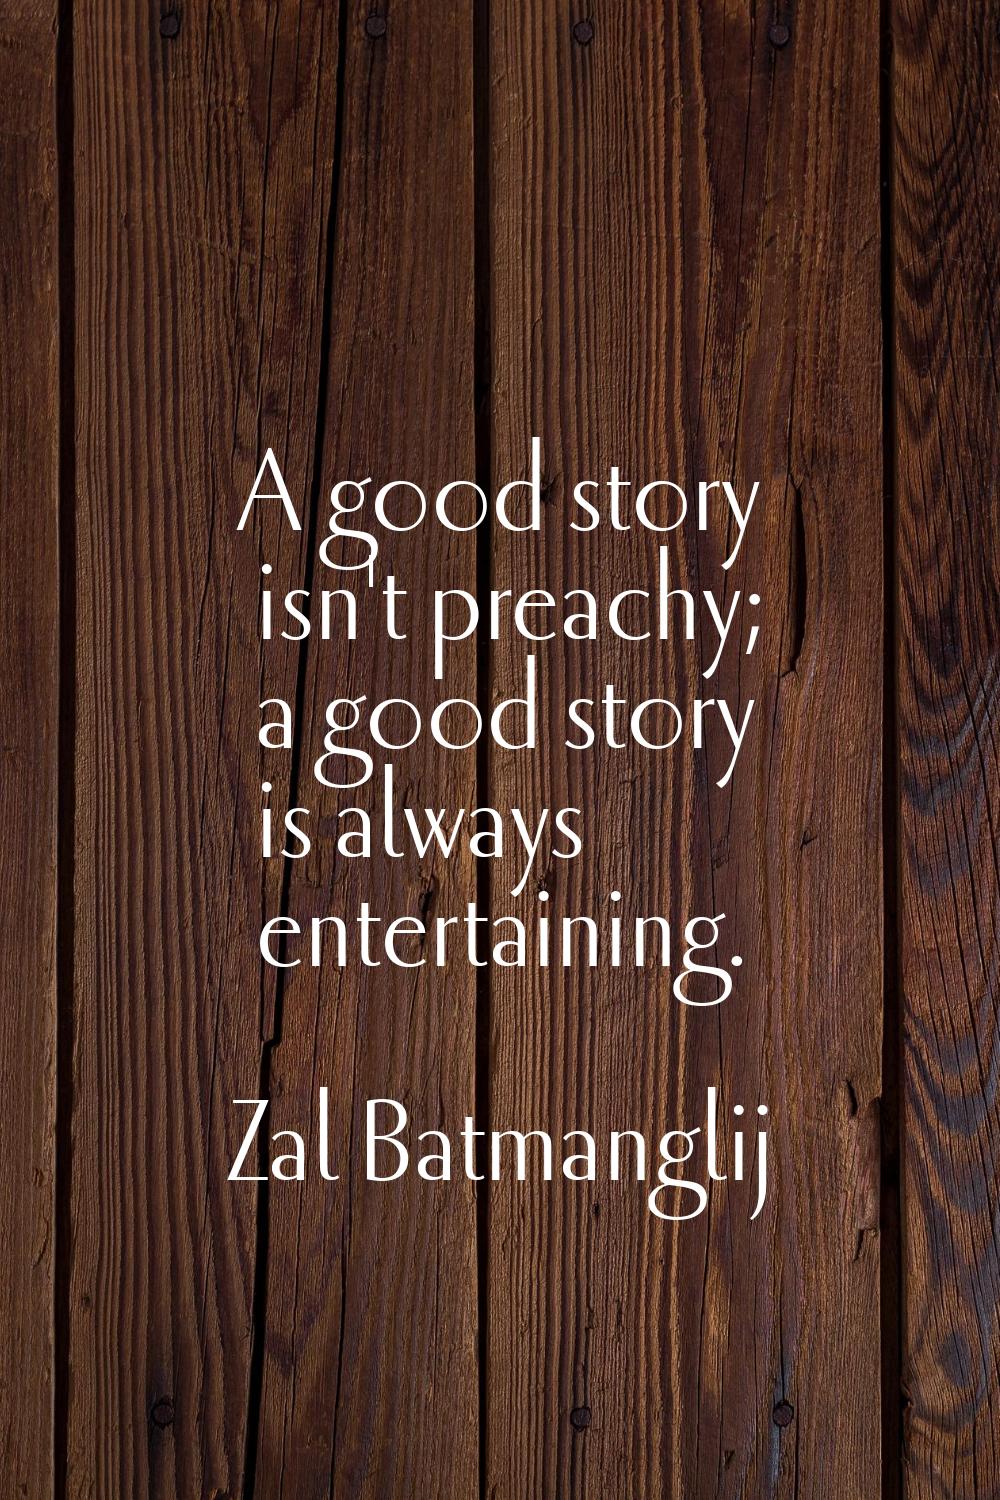 A good story isn't preachy; a good story is always entertaining.